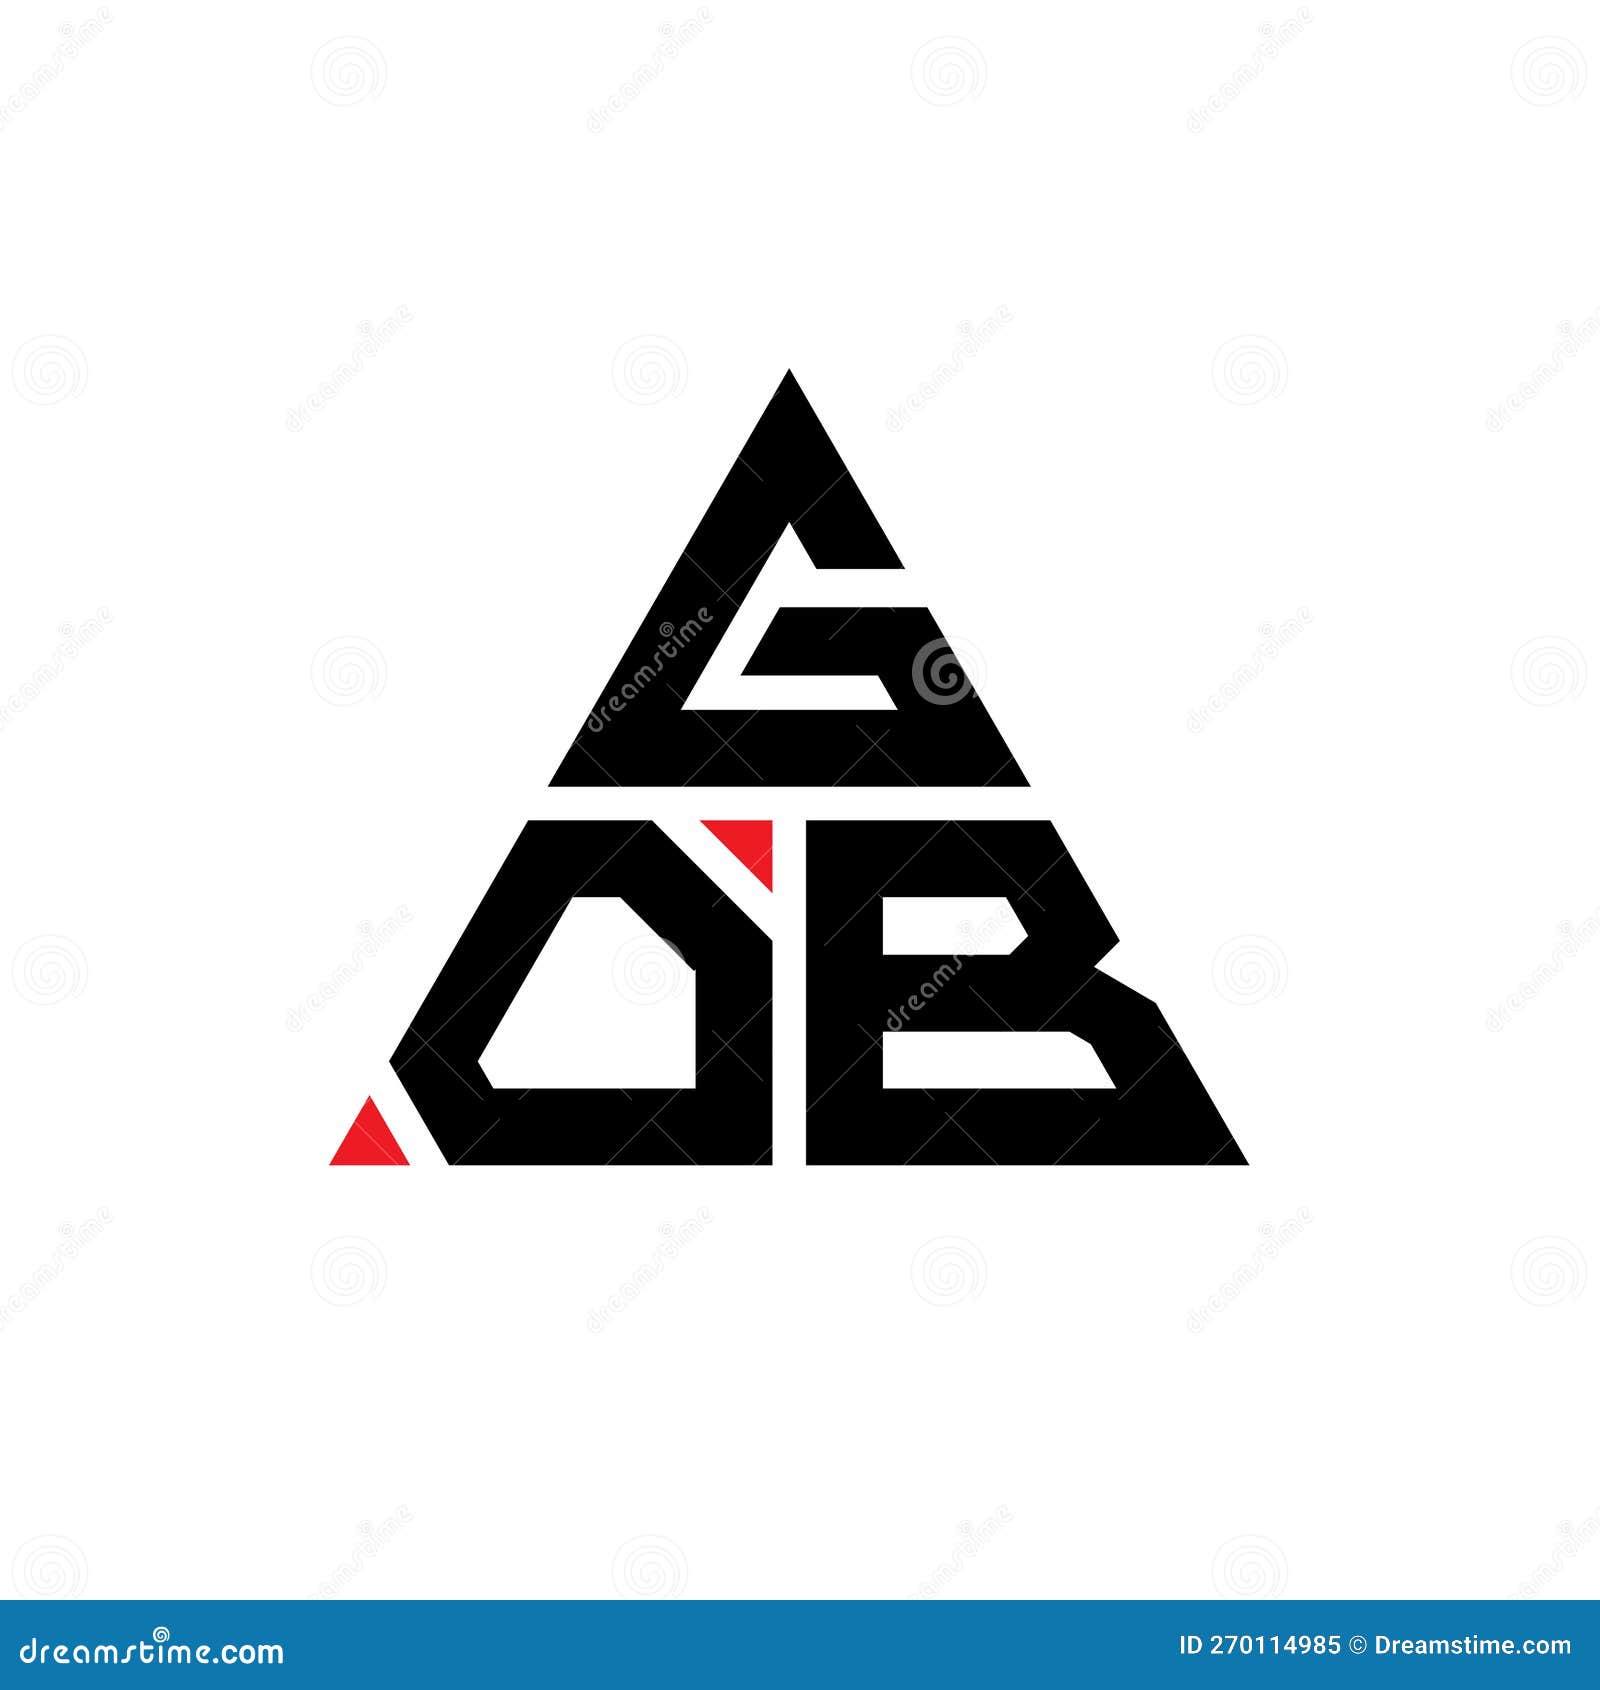 gob triangle letter logo  with triangle . gob triangle logo  monogram. gob triangle  logo template with red